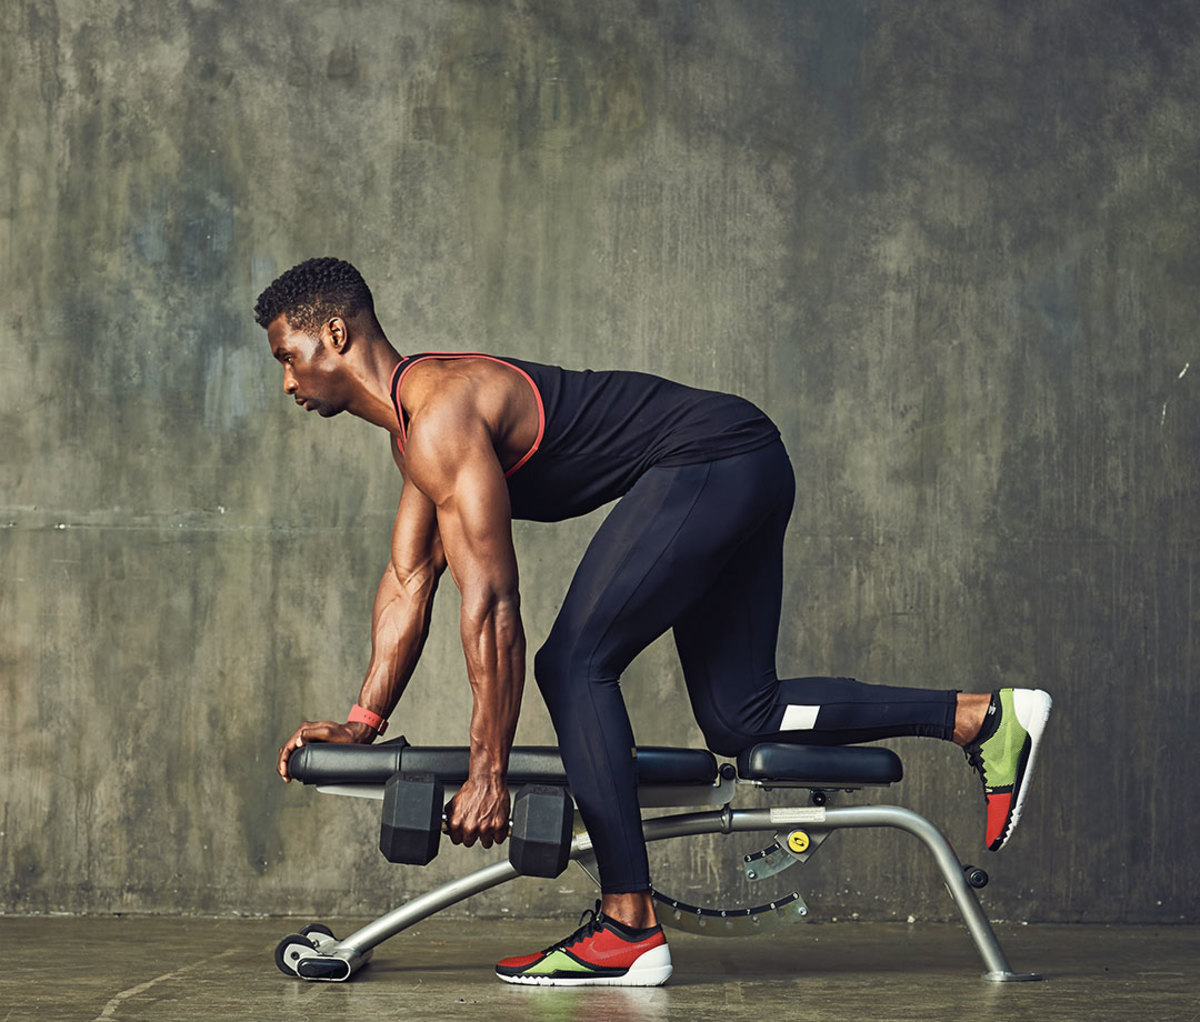 4 Exercises That Will Widen Your Back Muscles - Men's Journal